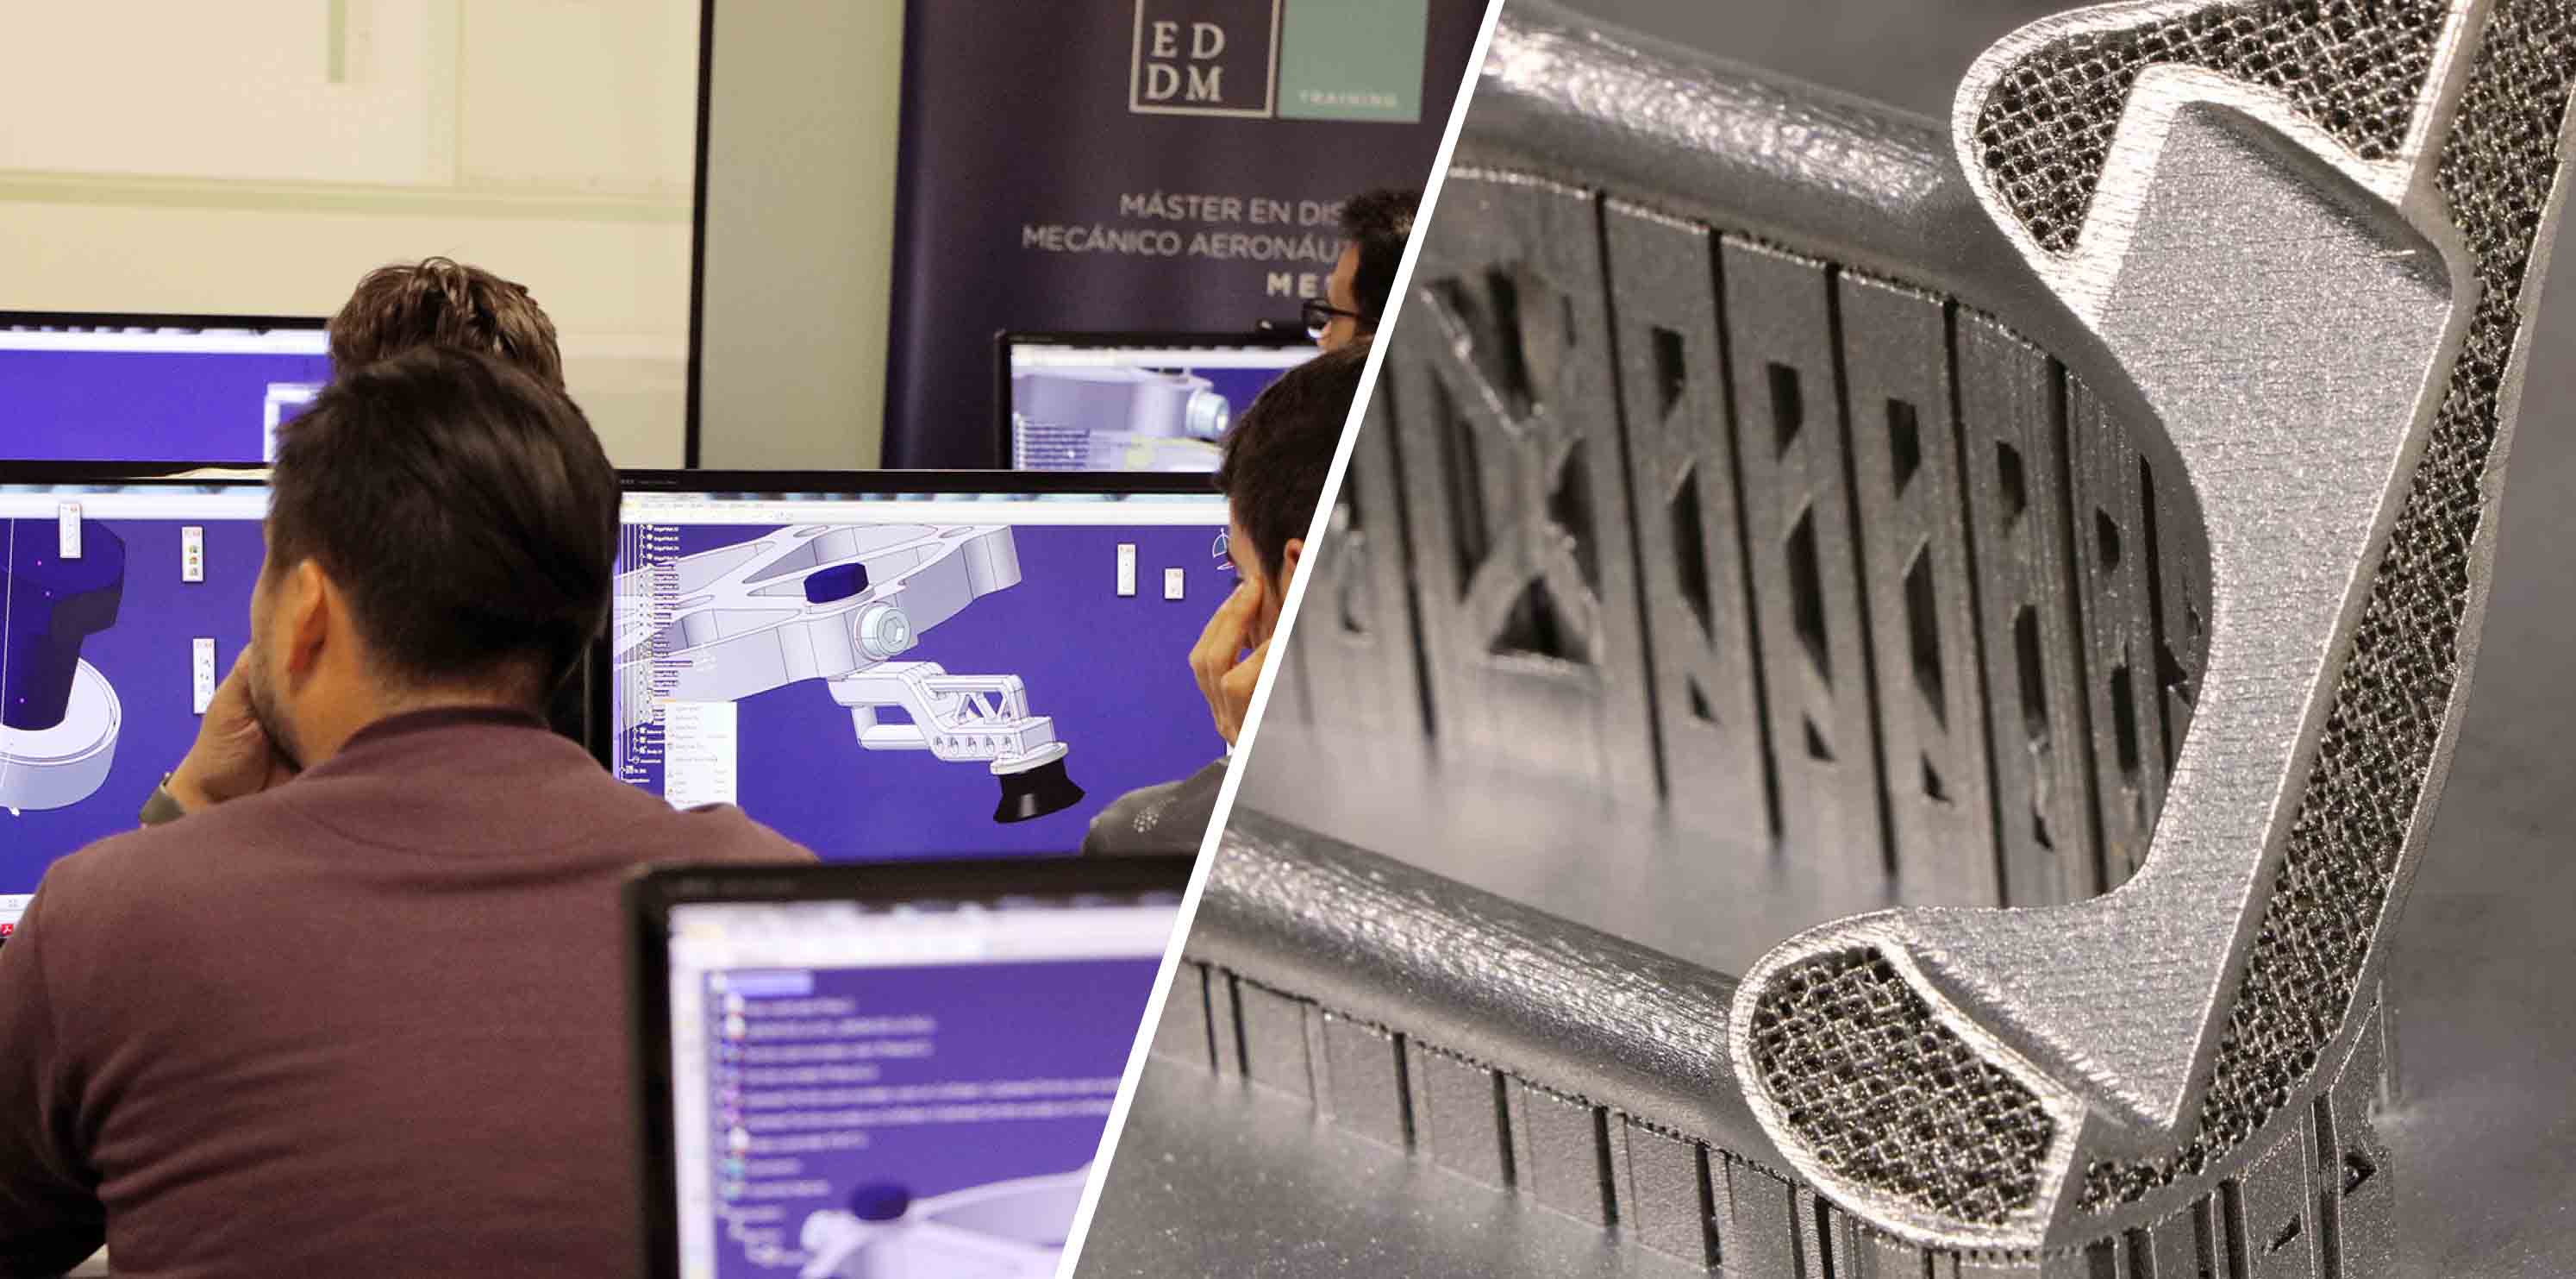 EDDM TRAINING launches the first Expert Course in 3D Metal Printing